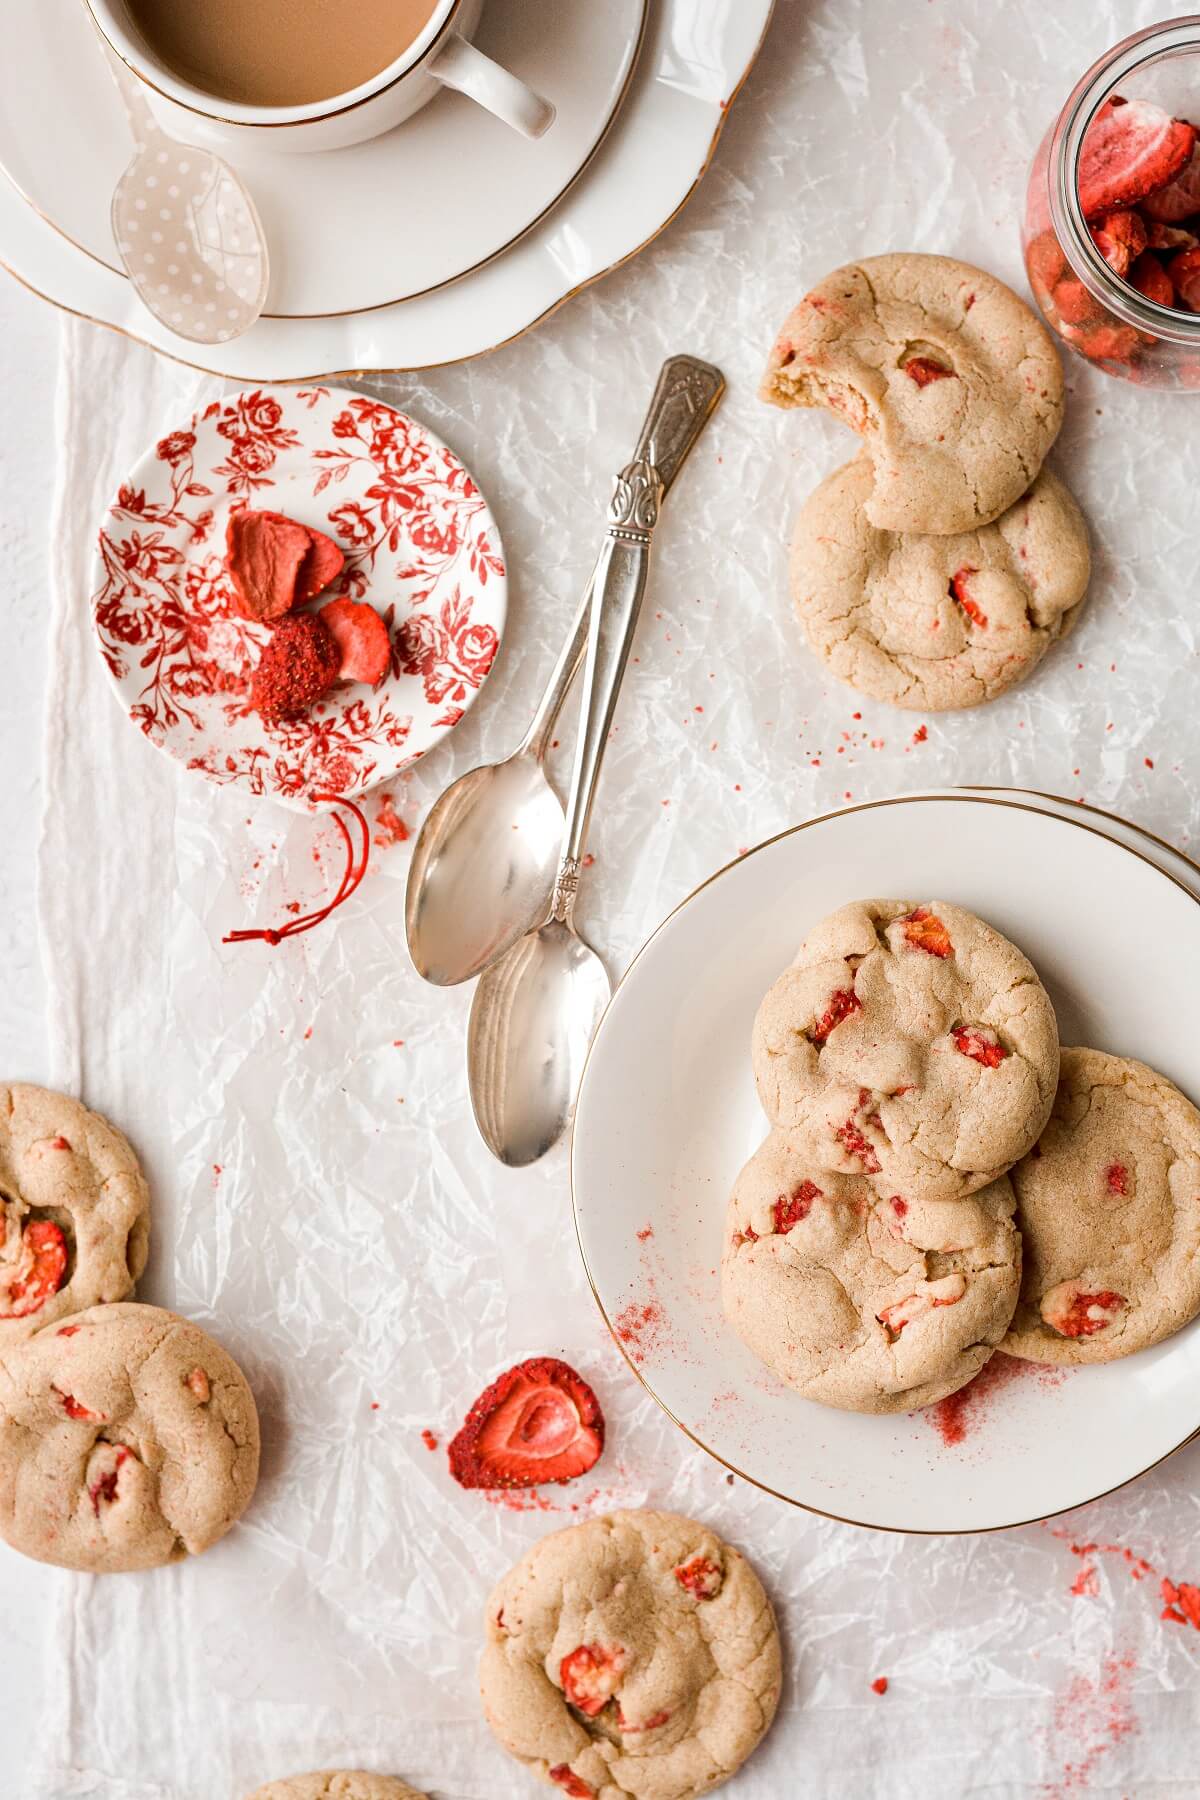 Strawberry cookies on a plate, with a cup of coffee.